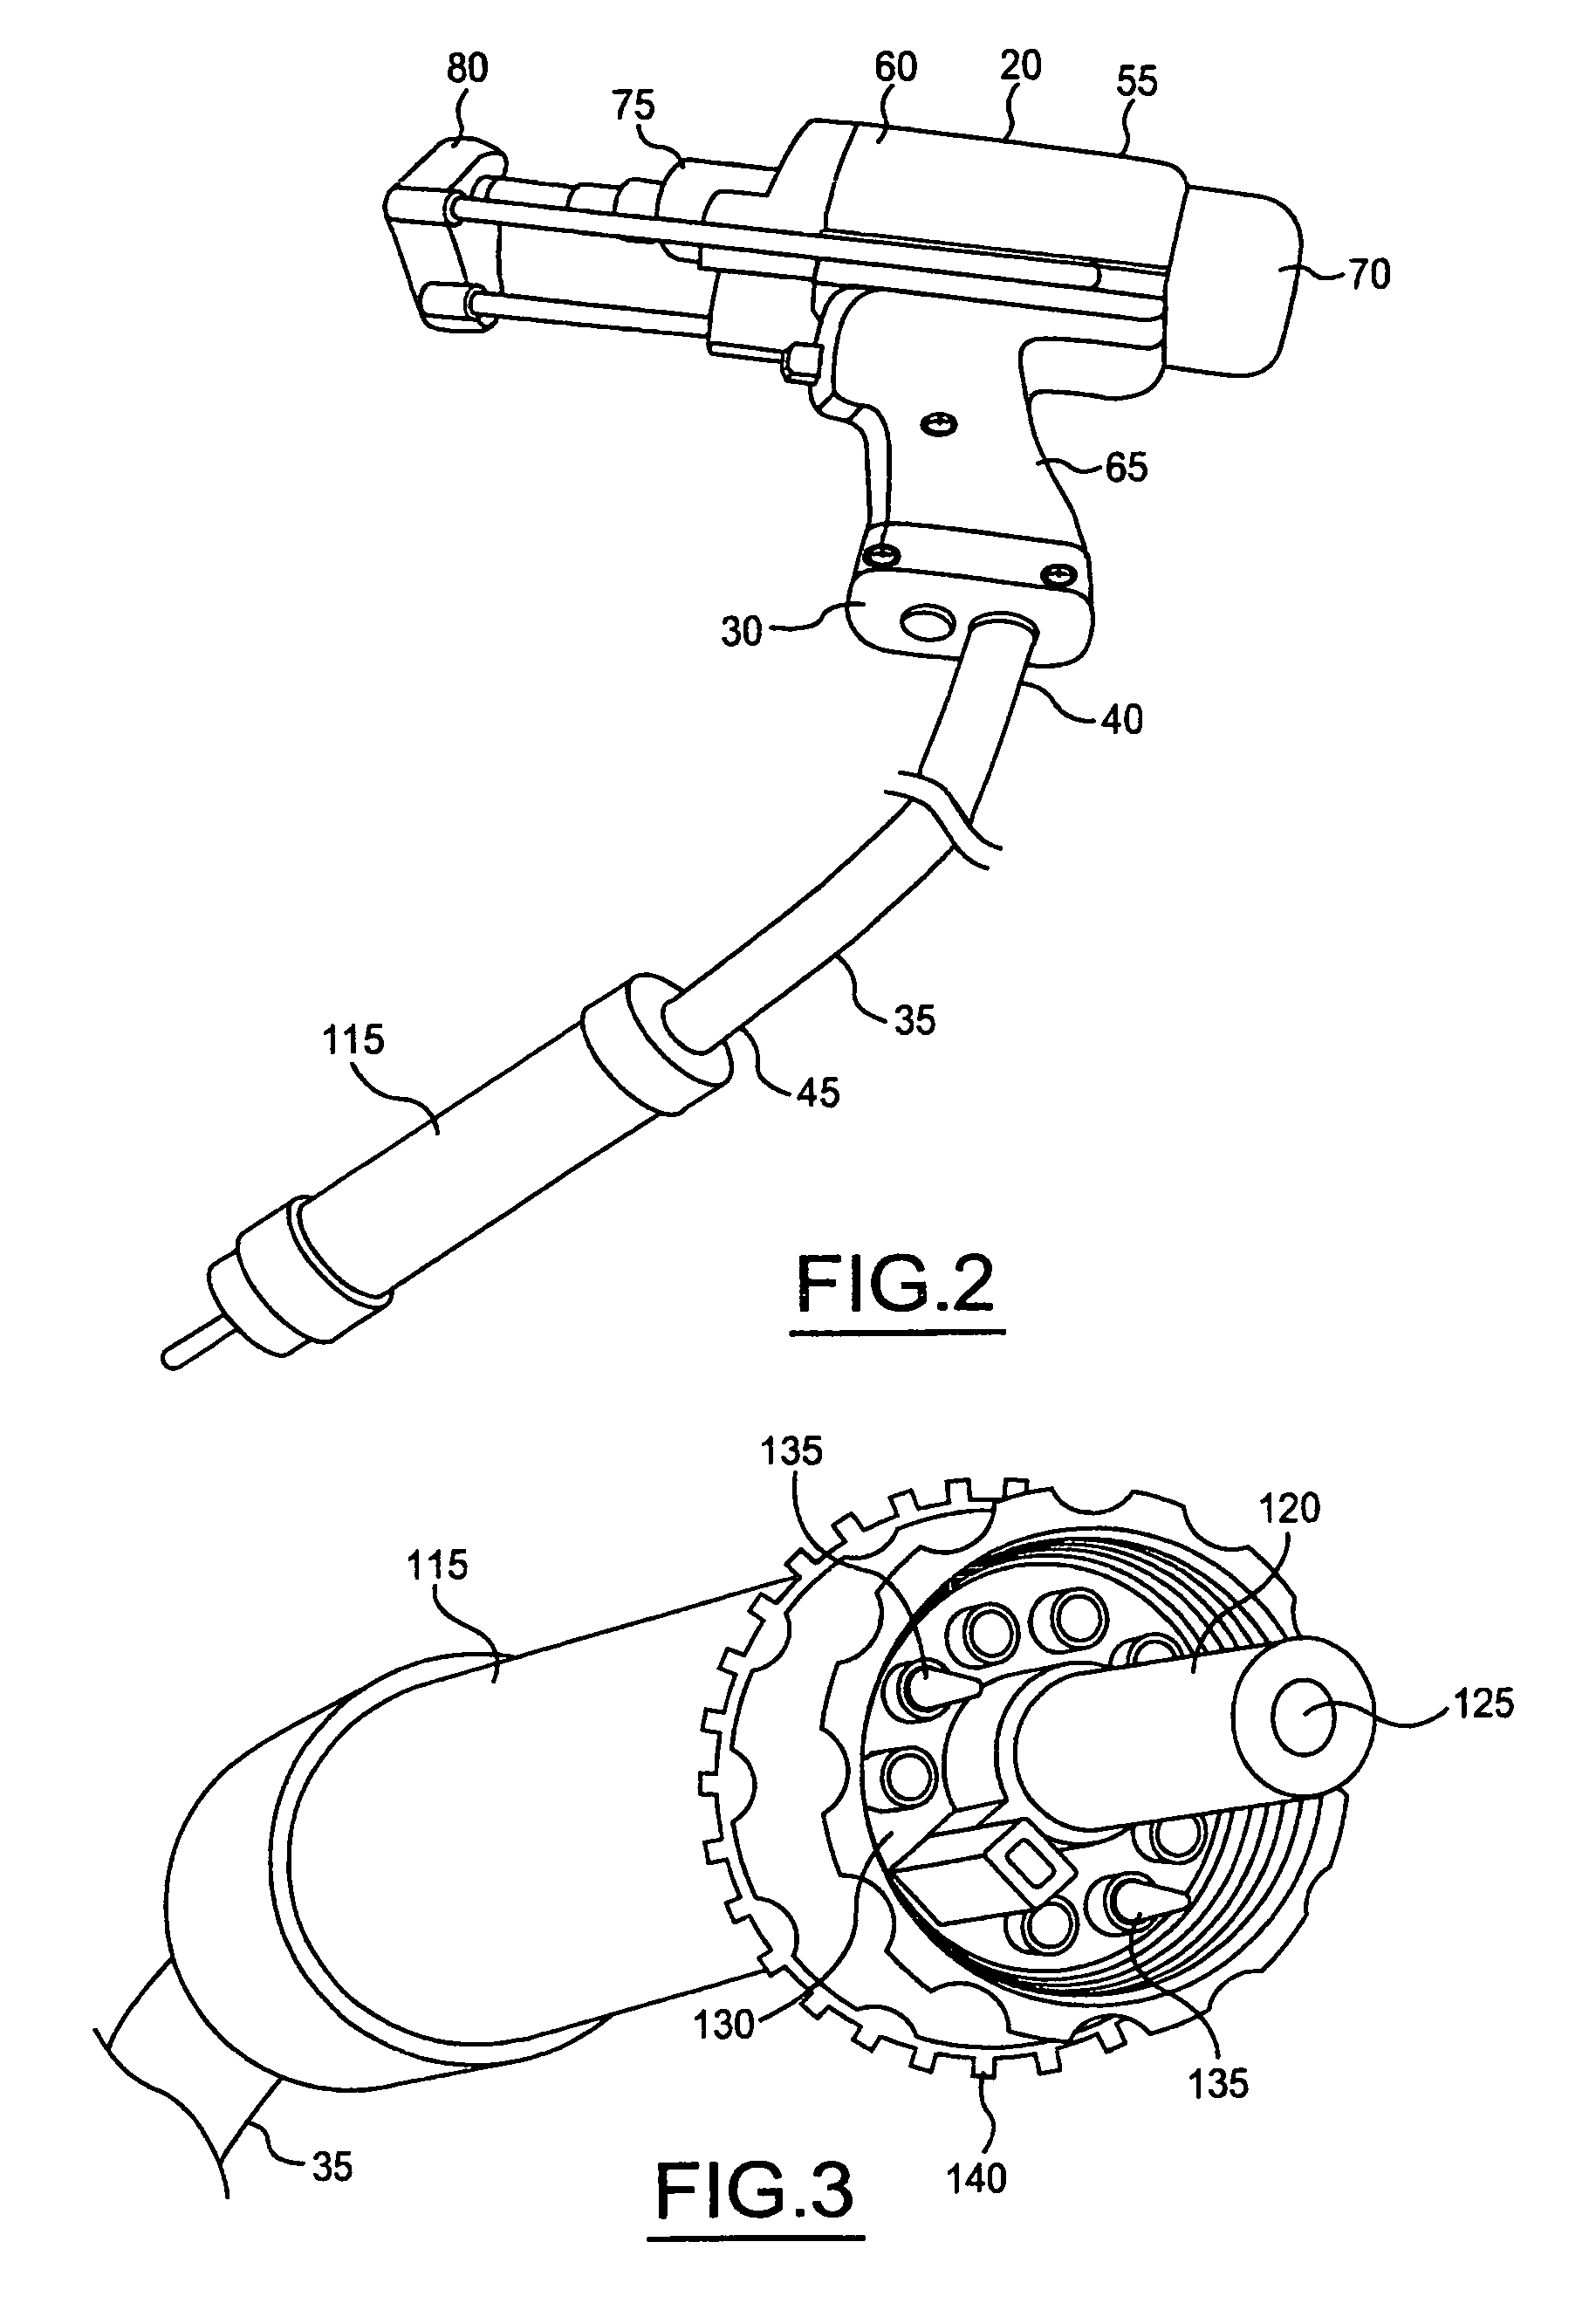 Stud welding apparatus with composite cable